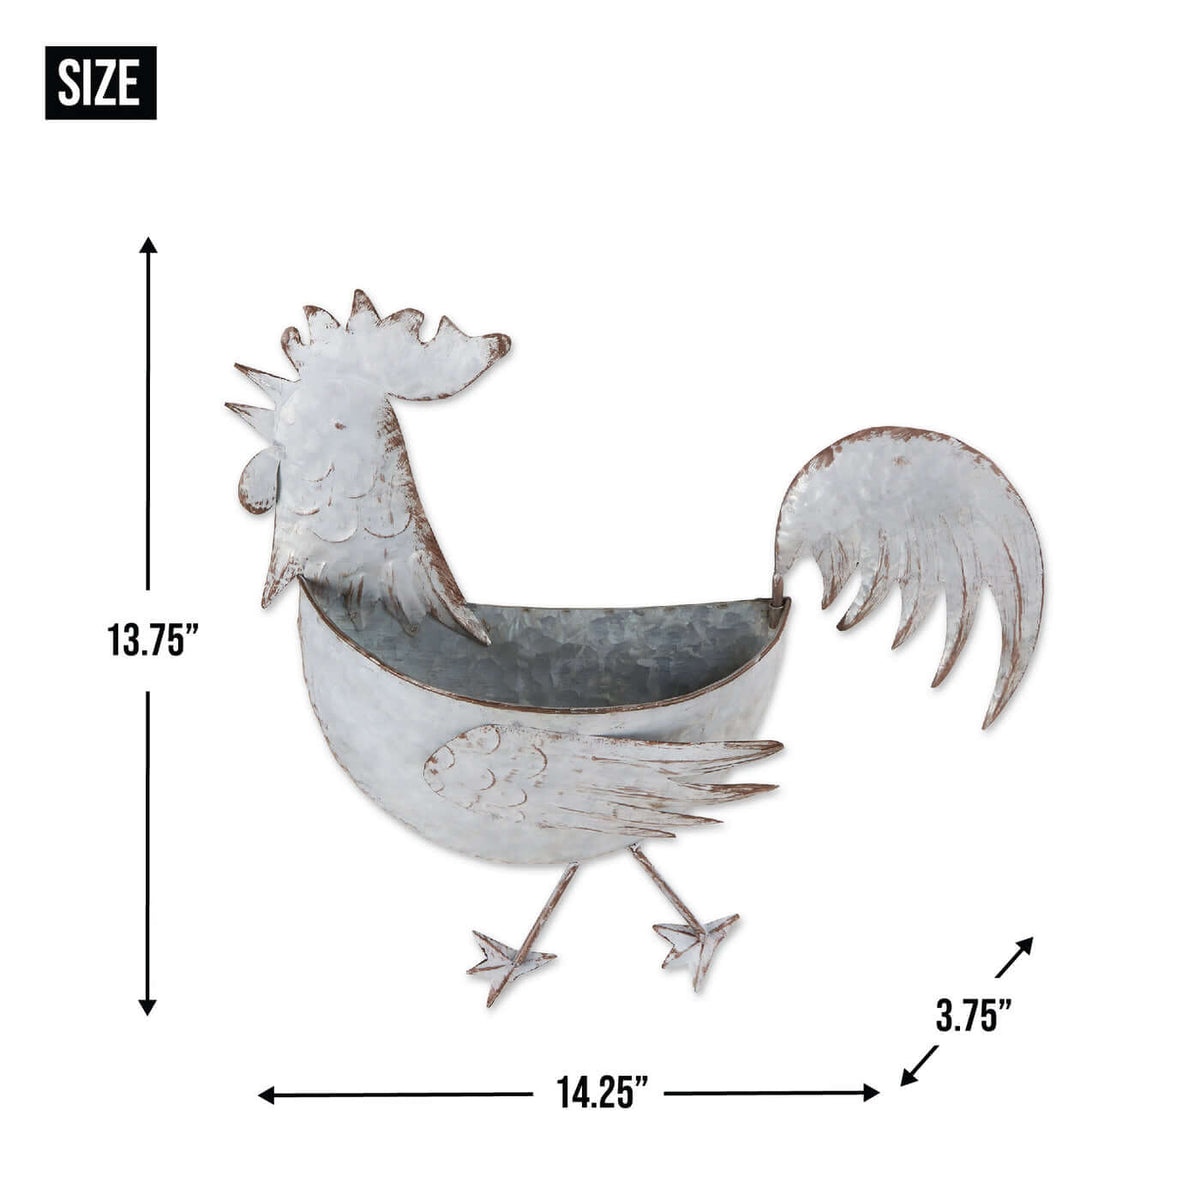 Pig and Rooster Galvanized Wall Planter